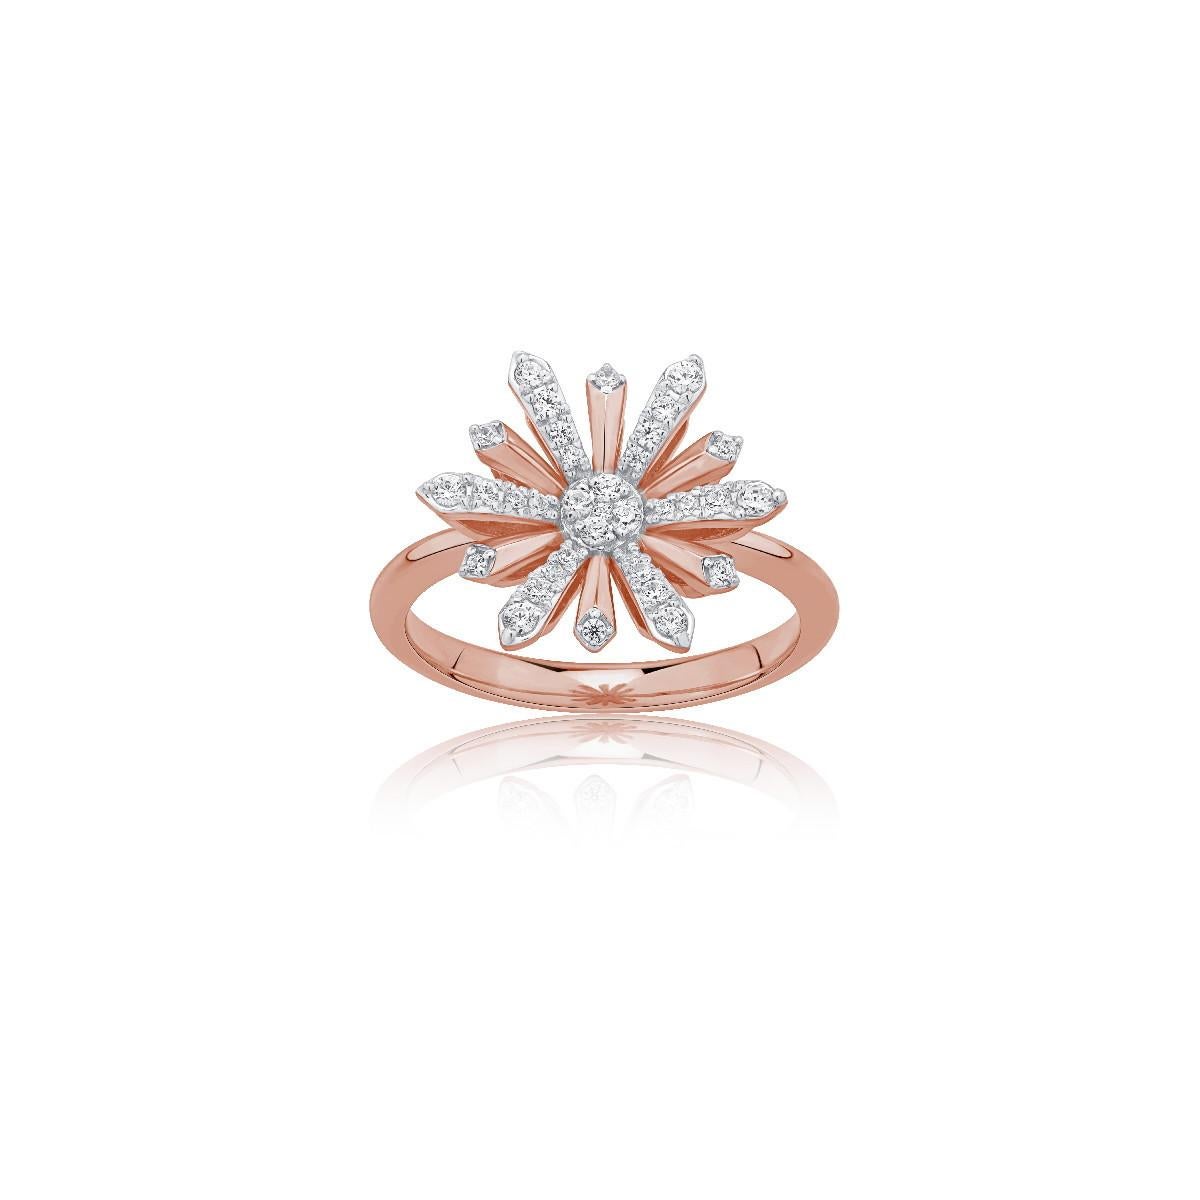 Edelweiss collection...
Option of yellow or white gold.
Pieces make to order in finish and size
18K rose gold ring weighing 4.75gr and 
35 diamonds 0.32 ct

The Alpine 